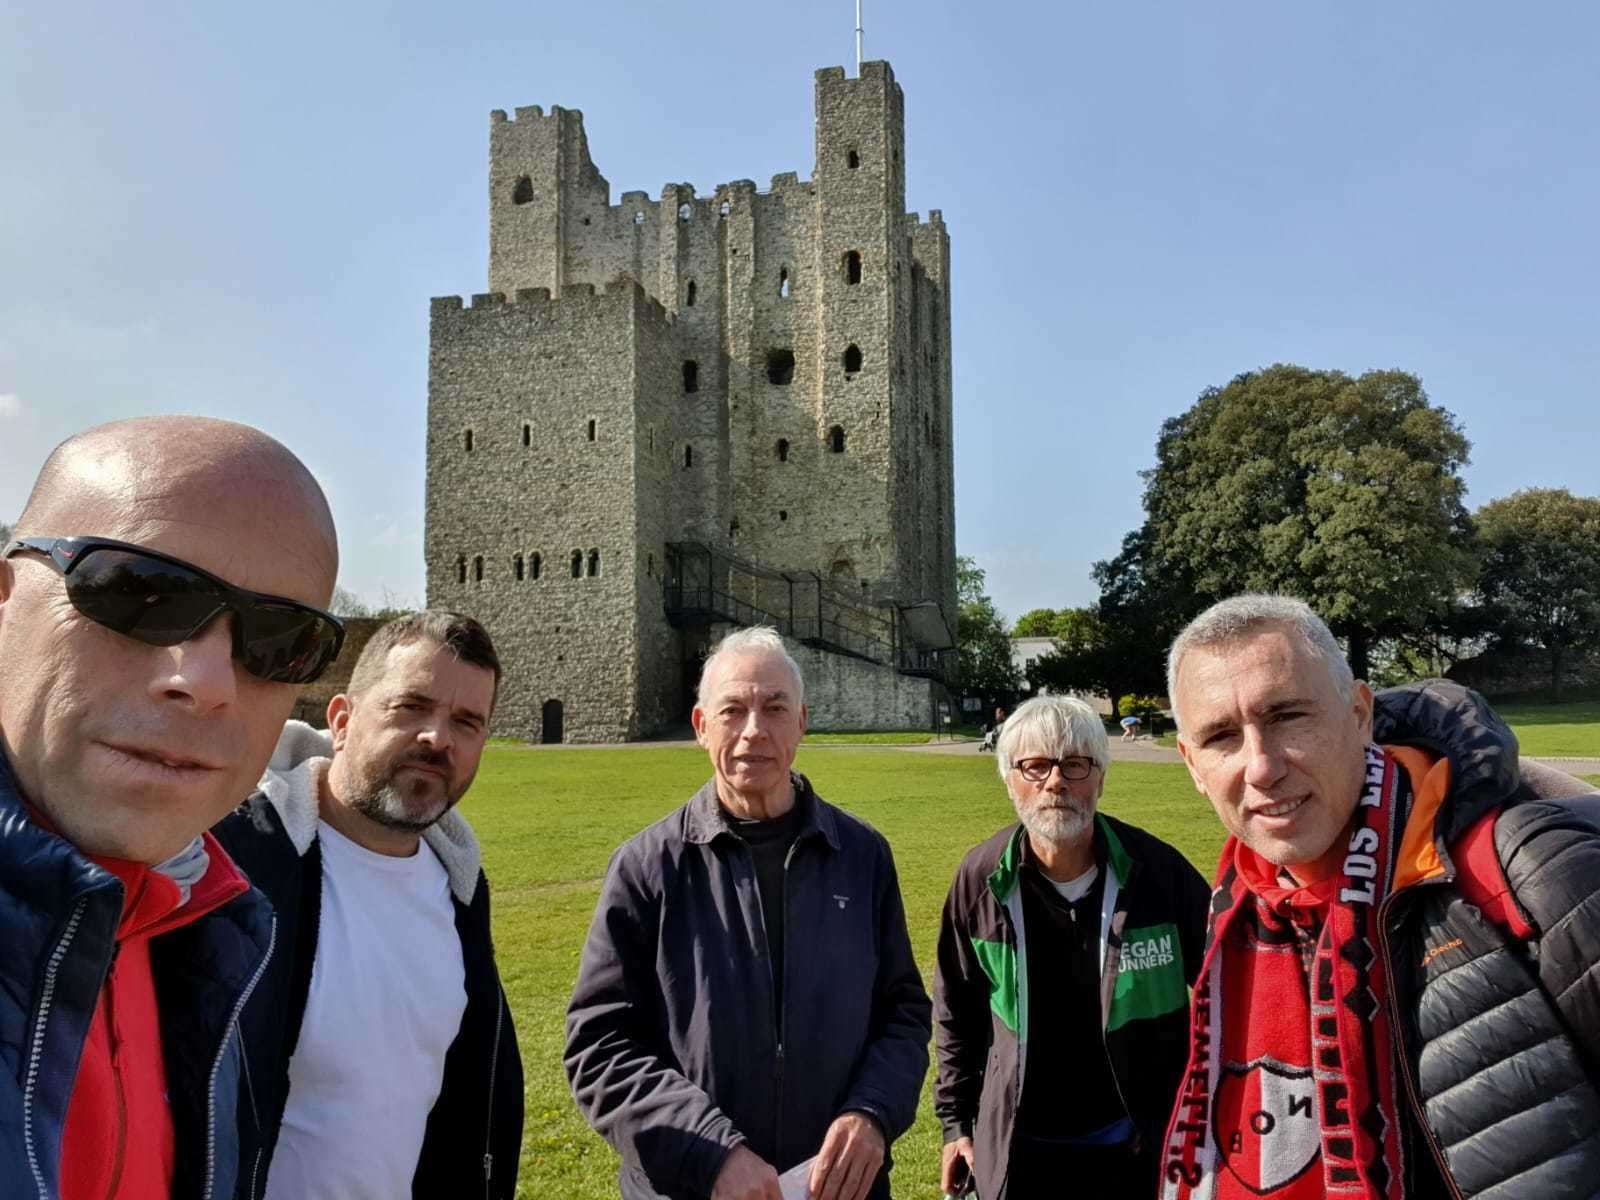 (Left-right) Alfonso Quaranta, Diego Gindin, Andrew Rootes, Adrian Pope, and Pablo Cerra, visiting Rochester Castle